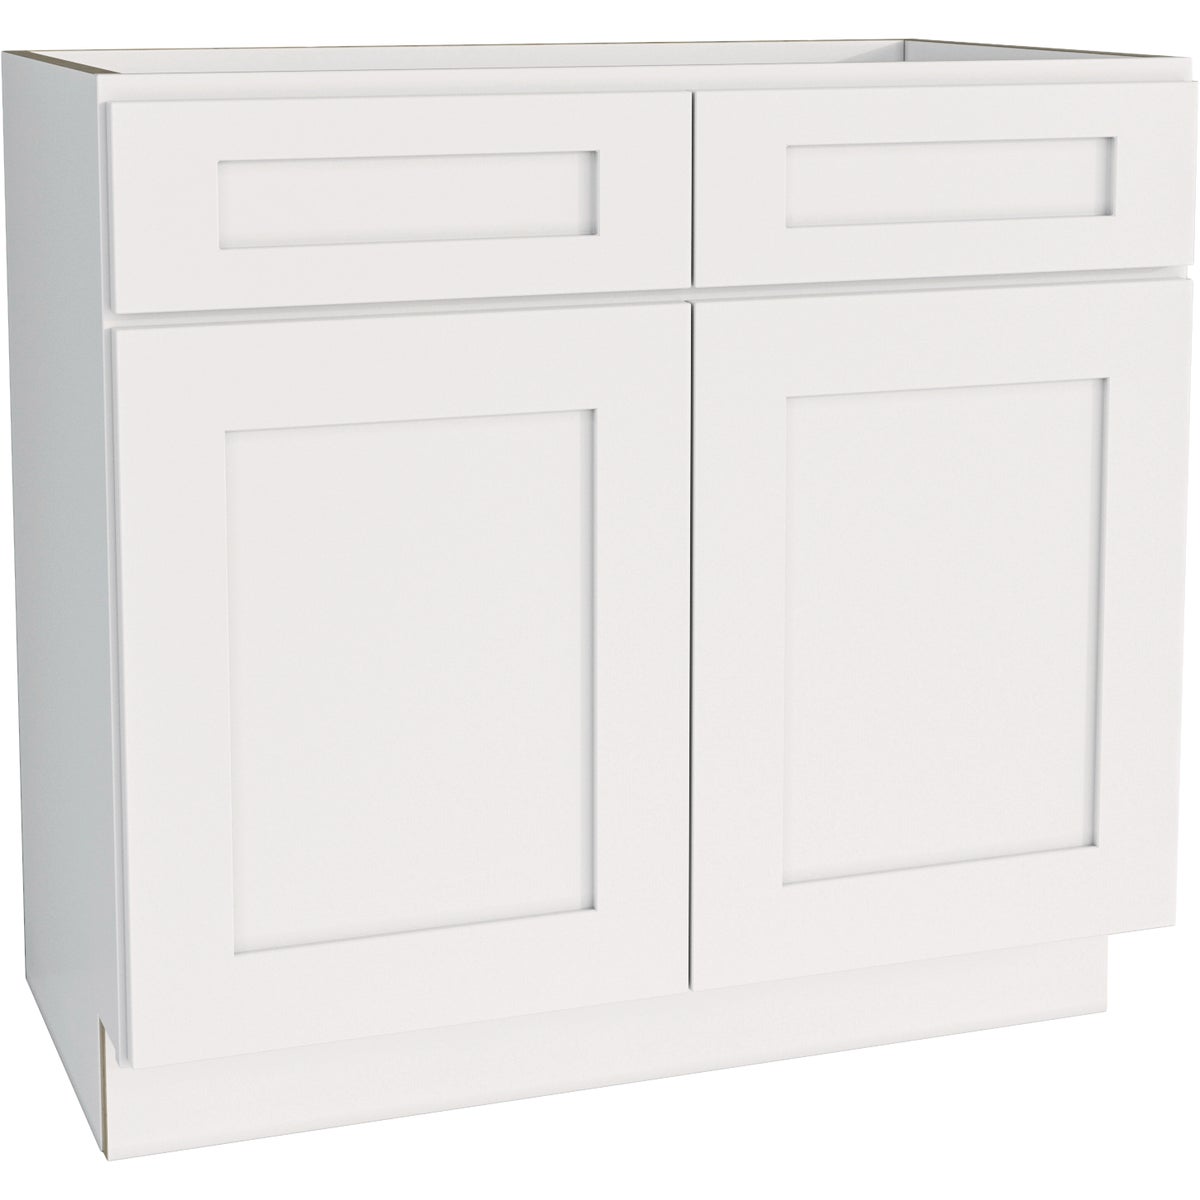 CraftMark Plymouth Shaker 36 In. W x 24 In. D x 34.5 In. H Ready To Assemble White Sink Base Kitchen Cabinet